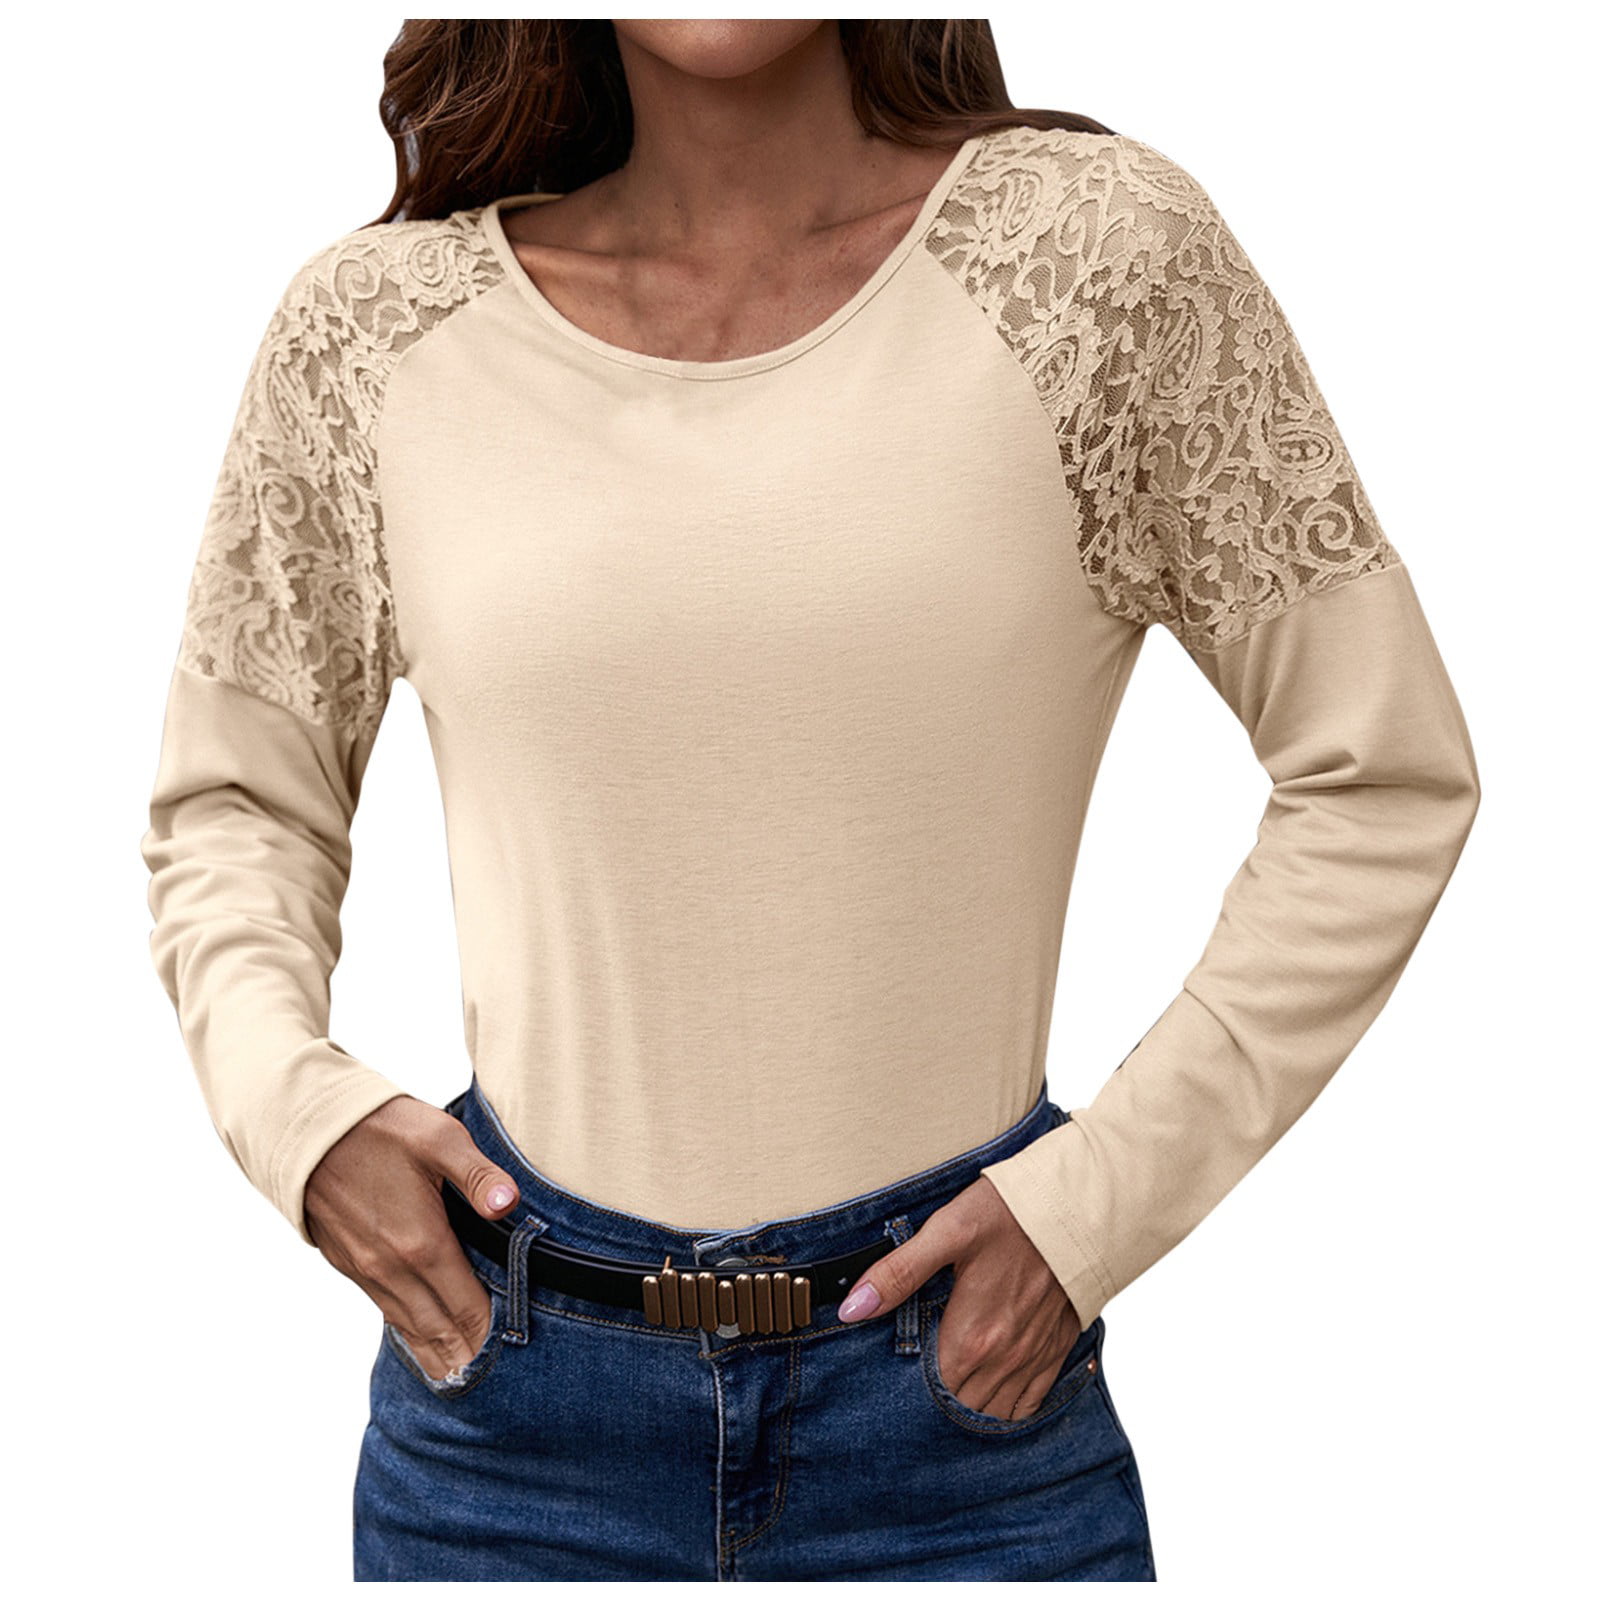 NKOOGH Misses Tops And Blouses for Fall Light Long Sleeve Women'S Casual  Loose Top Shirt Round Neck Solid Tops Shirt Soft Long Sleeve Base Layer Top